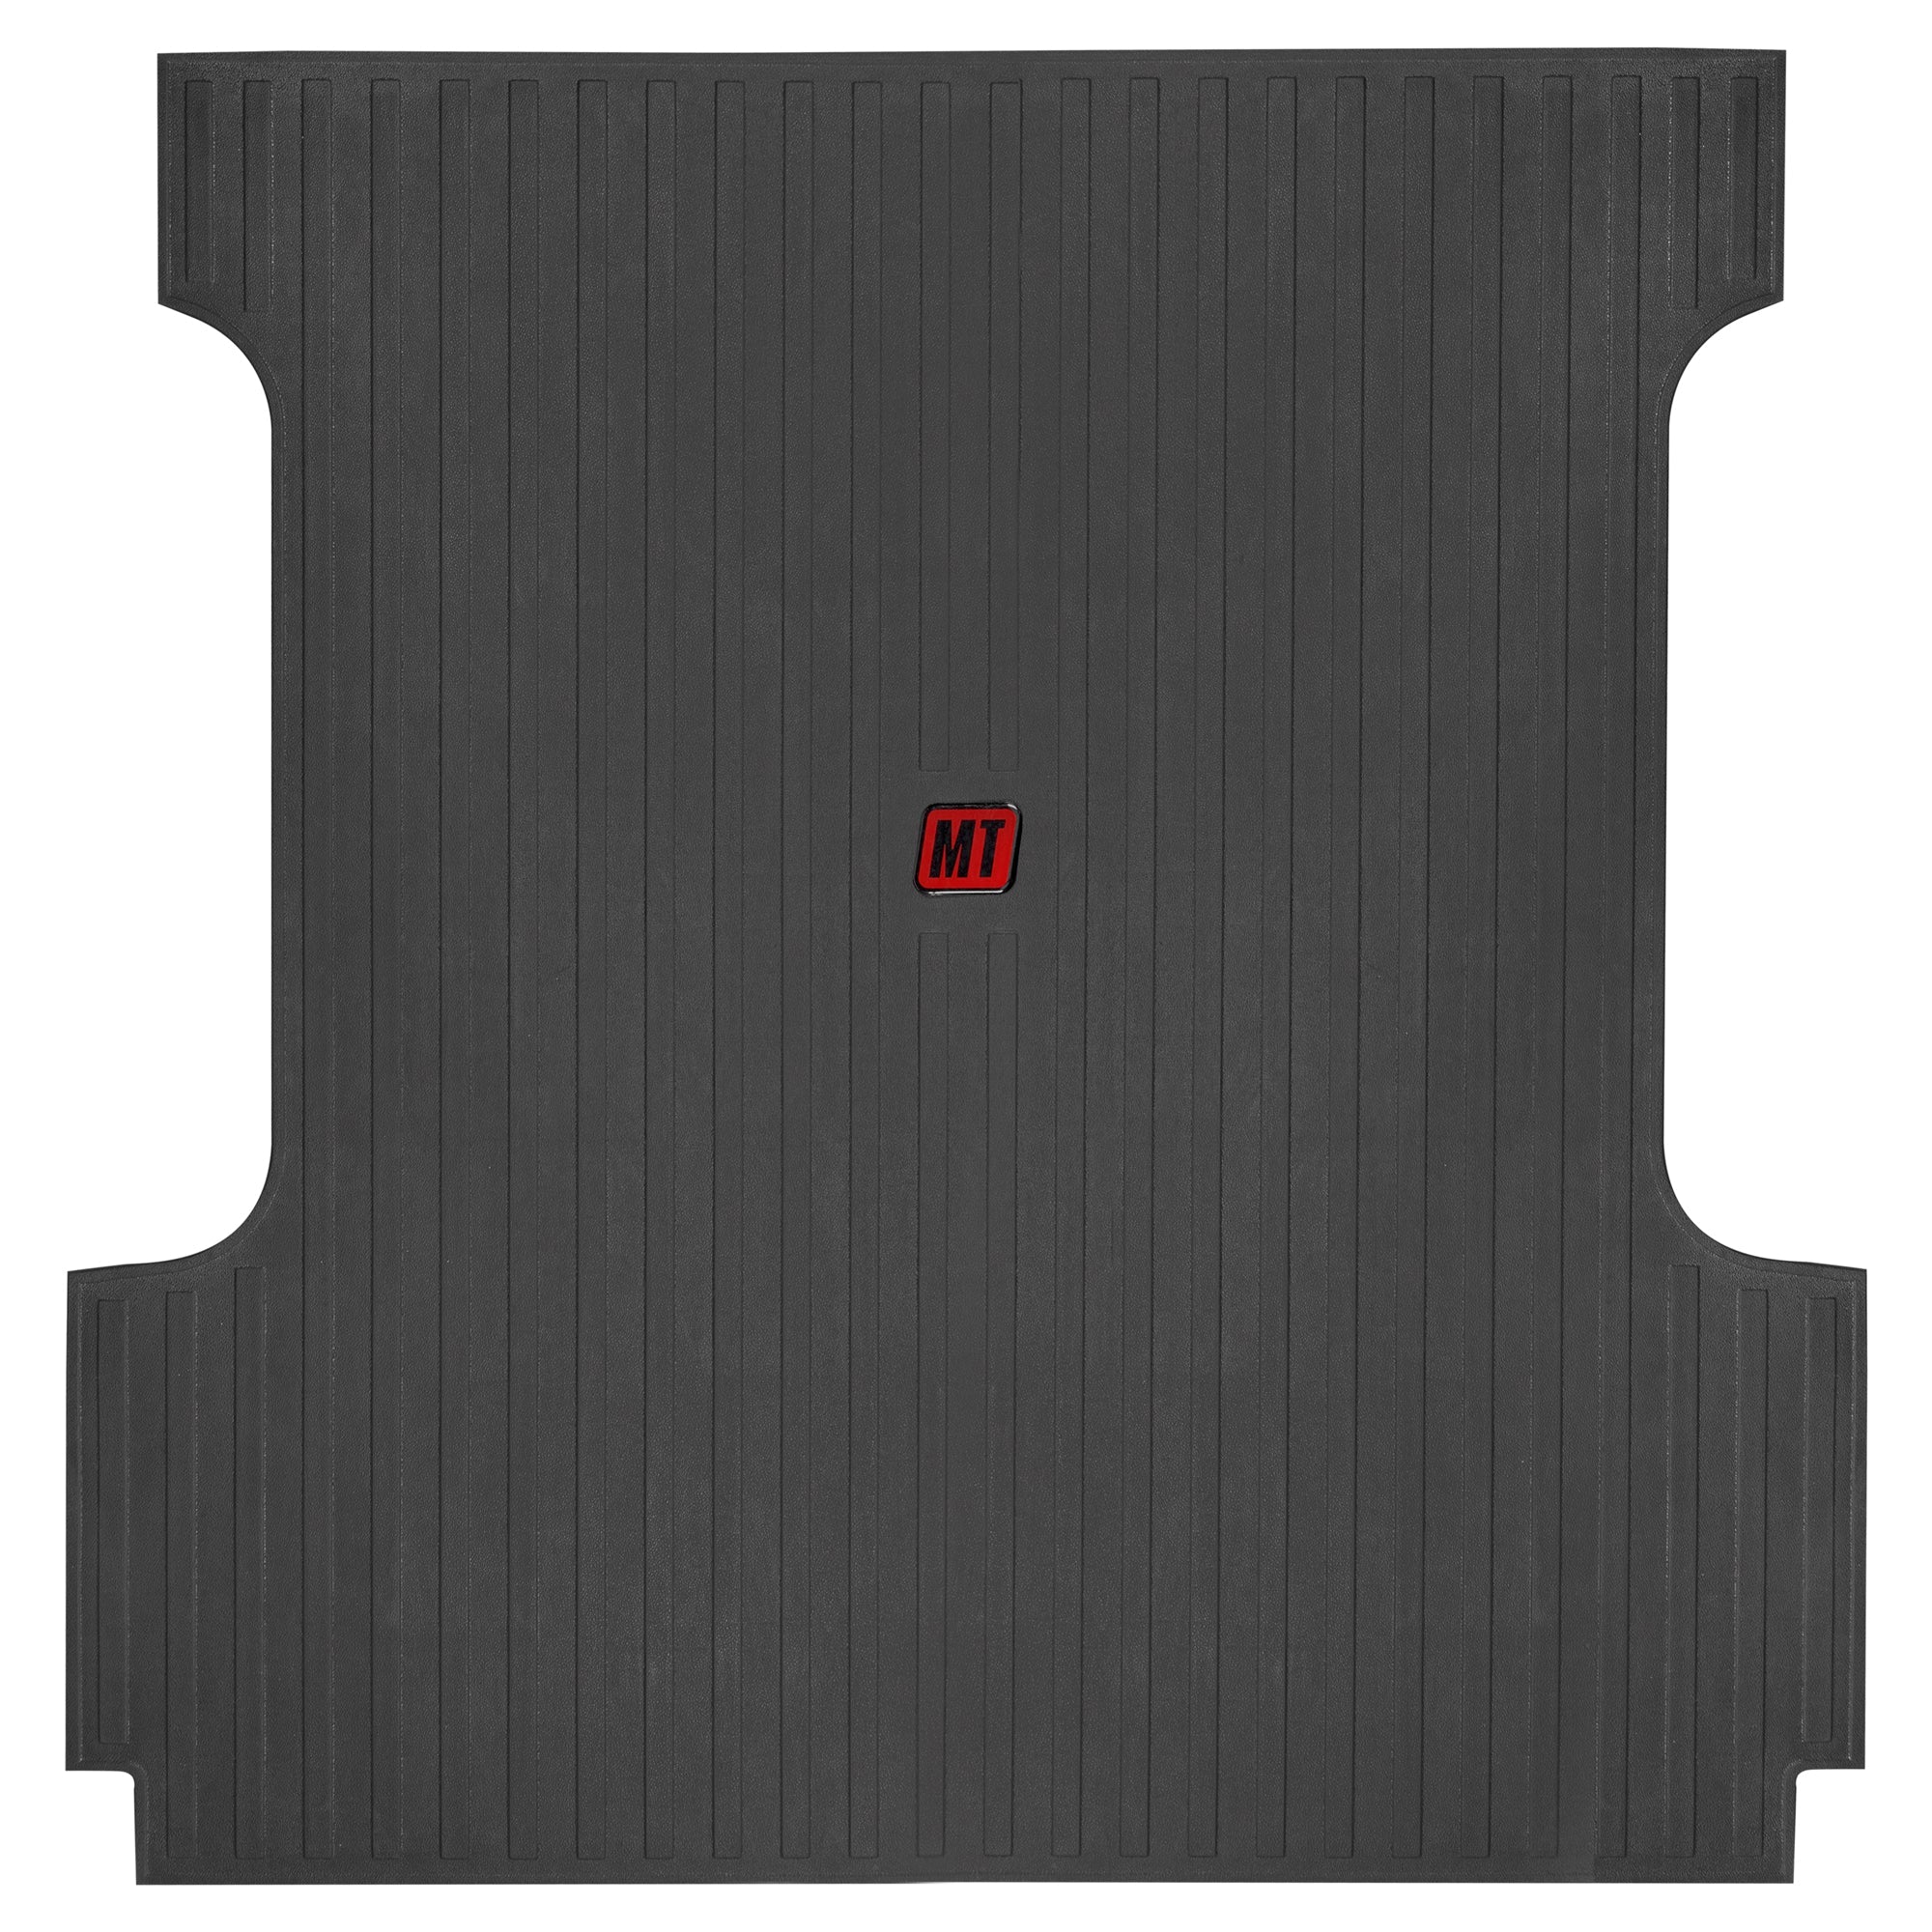 Motor Trend Custom Fit 3D Truck Bed Mat for 2015-2021 Ford F-150 CrewCab 5.5' Ft Bed Liner, All Weather Heavy Duty Thick Rubber